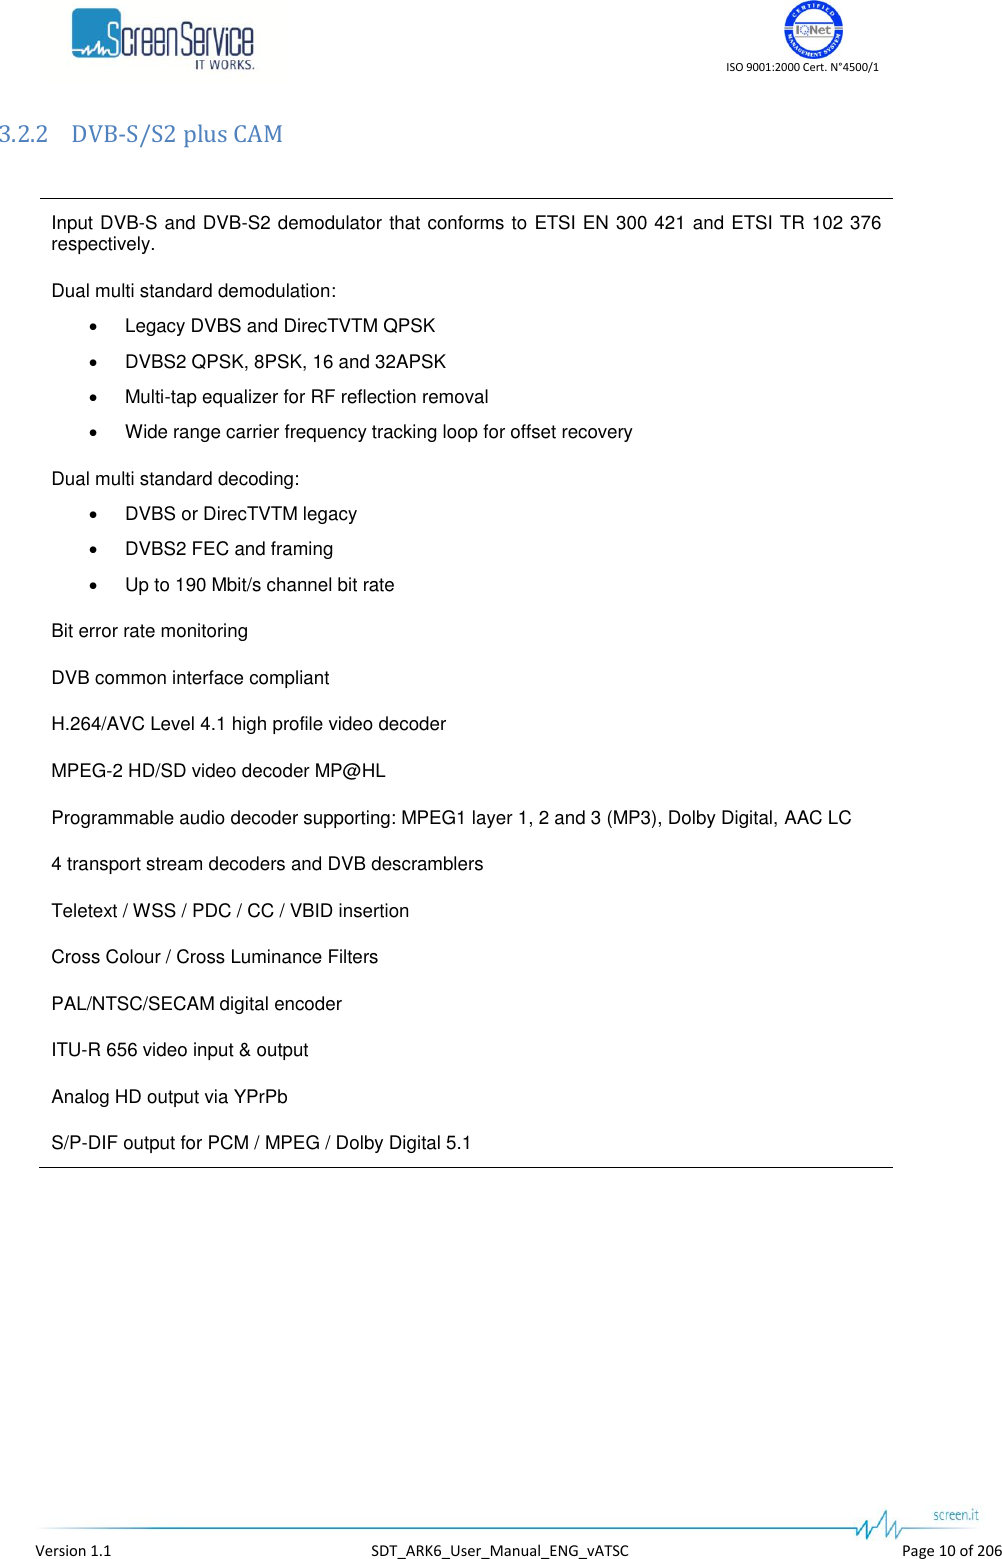    ISO 9001:2000 Cert. N°4500/1   Version 1.1  SDT_ARK6_User_Manual_ENG_vATSC  Page 10 of 206 3.2.2 DVB-S/S2 plus CAM  Input DVB-S and DVB-S2 demodulator that conforms to ETSI EN 300 421 and ETSI TR 102 376 respectively. Dual multi standard demodulation:  Legacy DVBS and DirecTVTM QPSK  DVBS2 QPSK, 8PSK, 16 and 32APSK  Multi-tap equalizer for RF reflection removal  Wide range carrier frequency tracking loop for offset recovery Dual multi standard decoding:  DVBS or DirecTVTM legacy  DVBS2 FEC and framing  Up to 190 Mbit/s channel bit rate Bit error rate monitoring DVB common interface compliant H.264/AVC Level 4.1 high profile video decoder MPEG-2 HD/SD video decoder MP@HL Programmable audio decoder supporting: MPEG1 layer 1, 2 and 3 (MP3), Dolby Digital, AAC LC 4 transport stream decoders and DVB descramblers Teletext / WSS / PDC / CC / VBID insertion Cross Colour / Cross Luminance Filters PAL/NTSC/SECAM digital encoder ITU-R 656 video input &amp; output Analog HD output via YPrPb S/P-DIF output for PCM / MPEG / Dolby Digital 5.1  